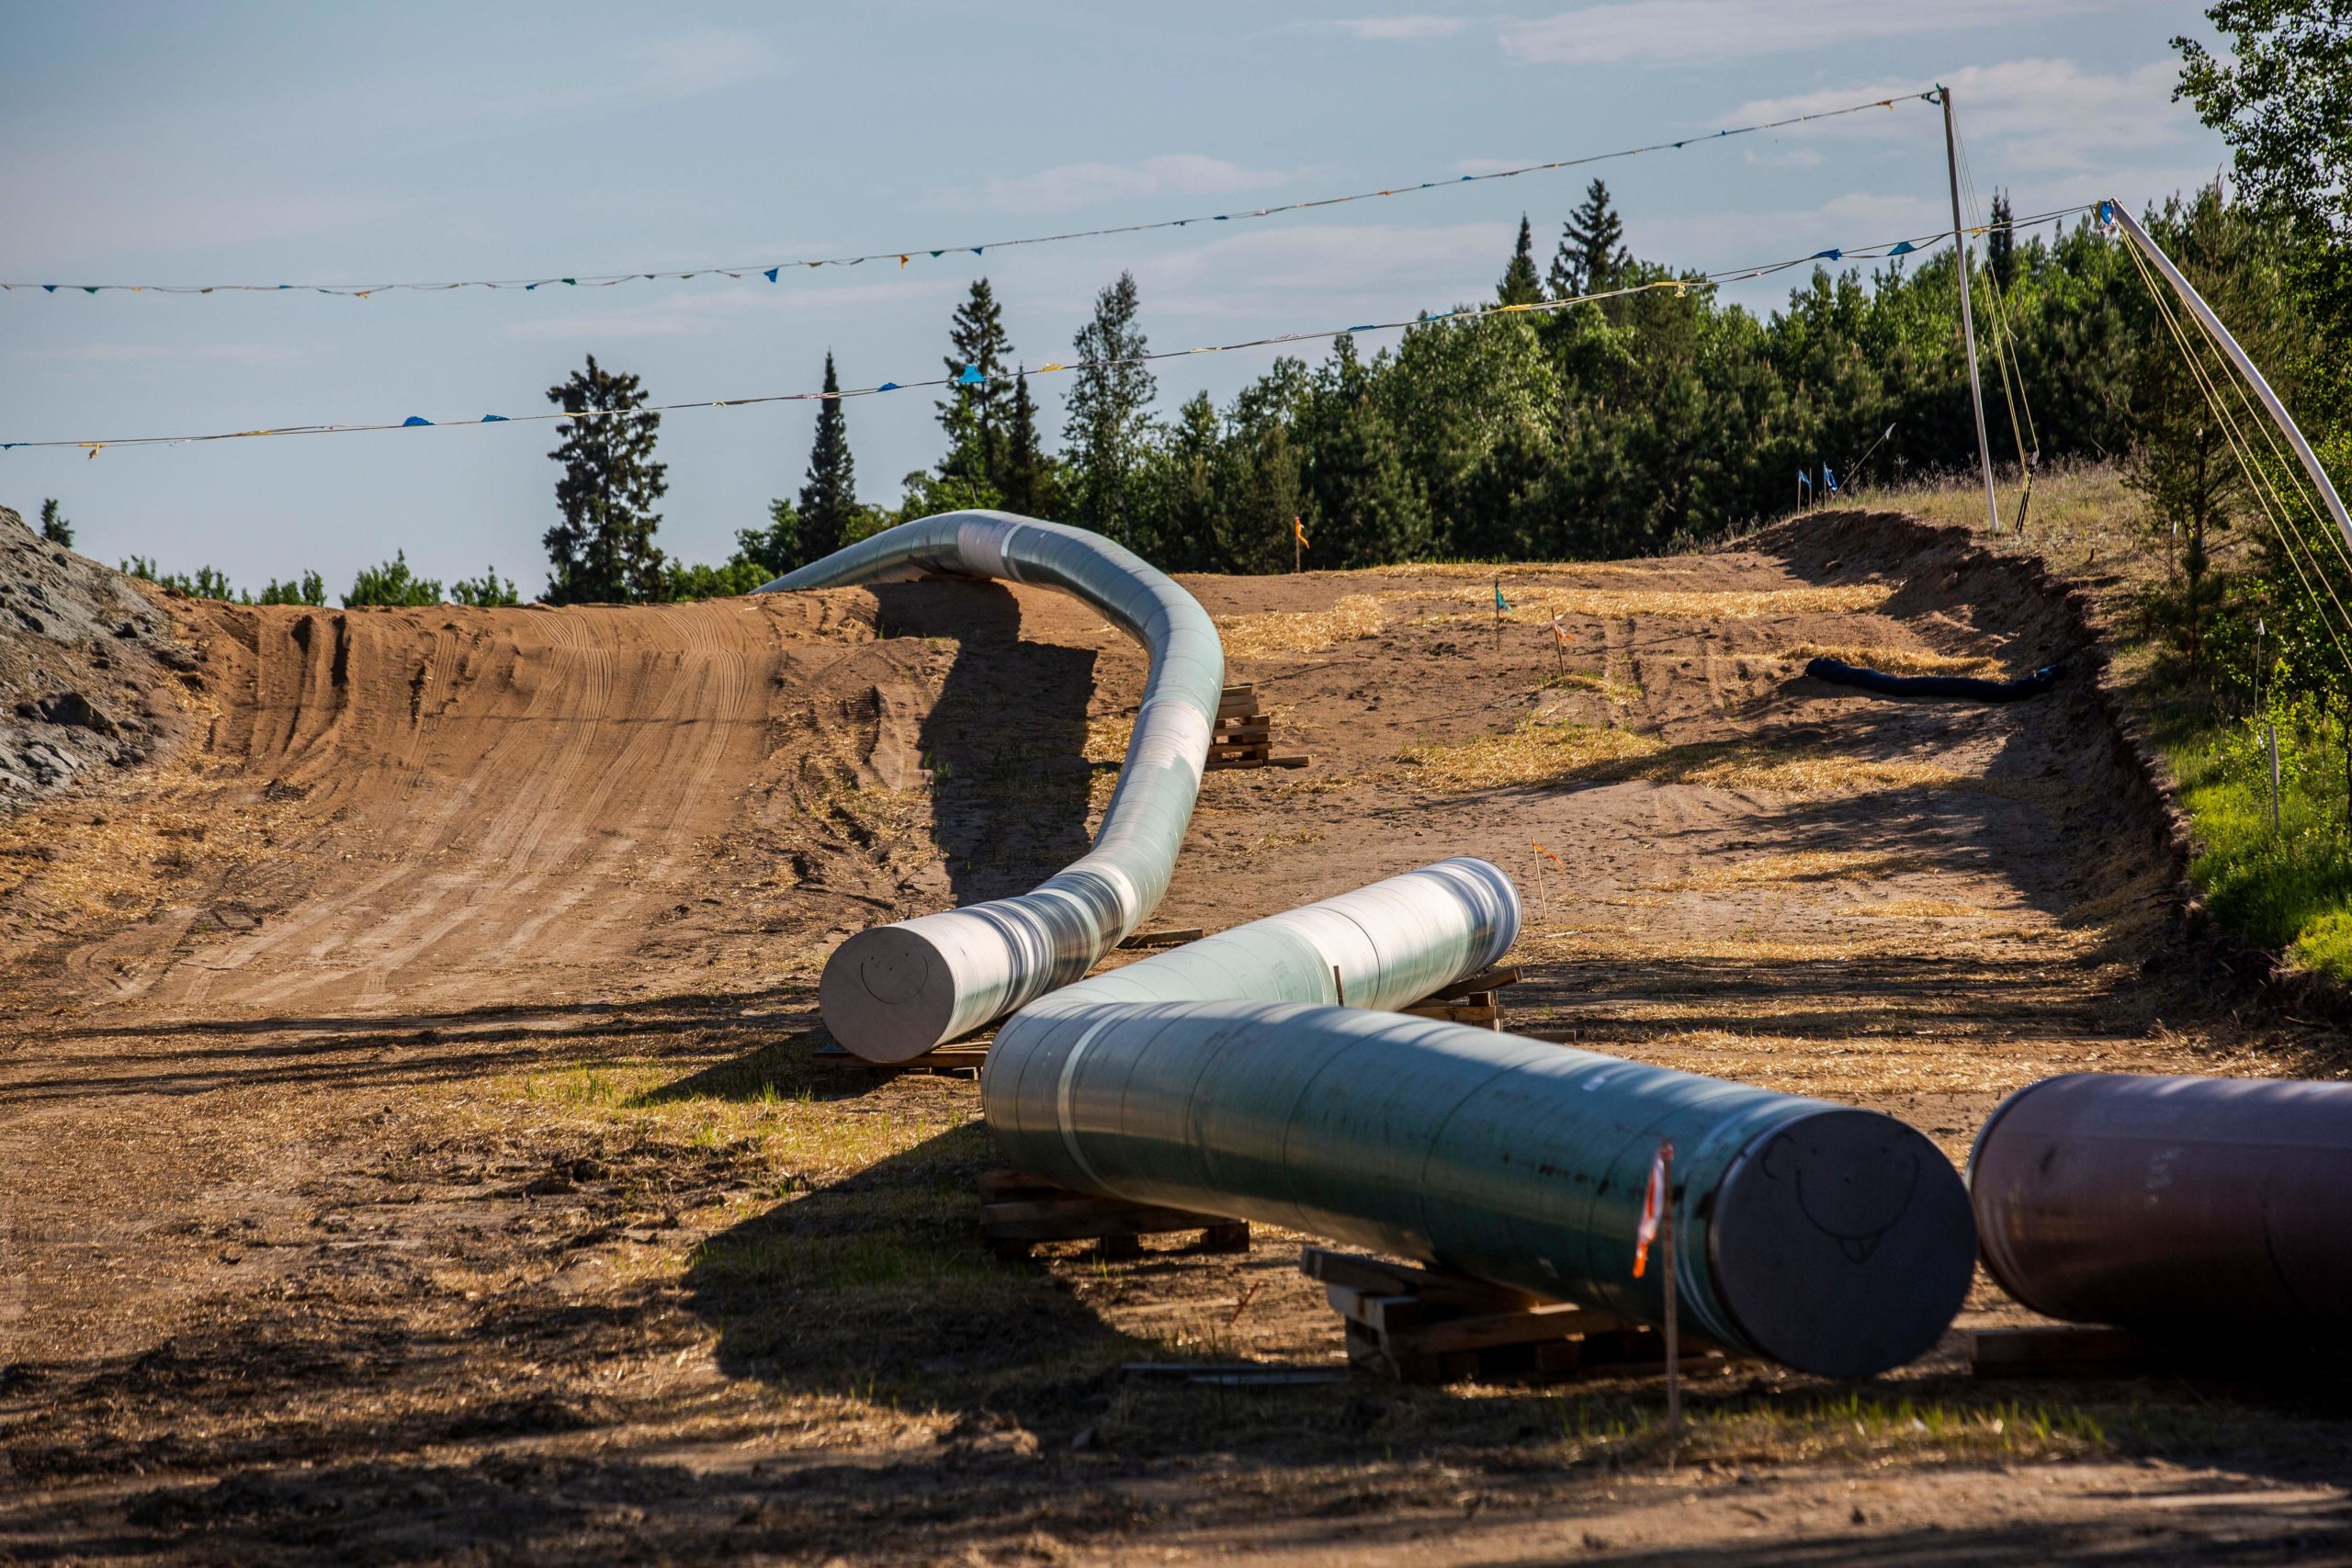 Sections of the Enbridge Line 3 pipeline are seen on the construction site on the White Earth Nation Reservation near Wauburn, Minnesota, on June 5, 2021. - Indigenous leaders and climate activists are gathering in northern Minnesota to protest the construction of the Line 3 oil pipeline. Line 3 is an oil sands pipeline which runs from Hardisty, Alberta, Canada to Superior, Wisconsin in the United States. In 2014, a new route for the Line 3 pipeline was proposed to allow an increased volume of oil to be transported daily. While that project has been approved in Canada, Wisconsin, and North Dakota, it has sparked continued resistance from climate justice groups and Native American communities in Minnesota. While many people are concerned about potential oil spills along Line 3, some Native American communities in Minnesota have opposed the project on the basis of treaty rights. (Photo by Kerem YUCEL / AFP) (Photo by KEREM YUCEL/AFP via Getty Images)